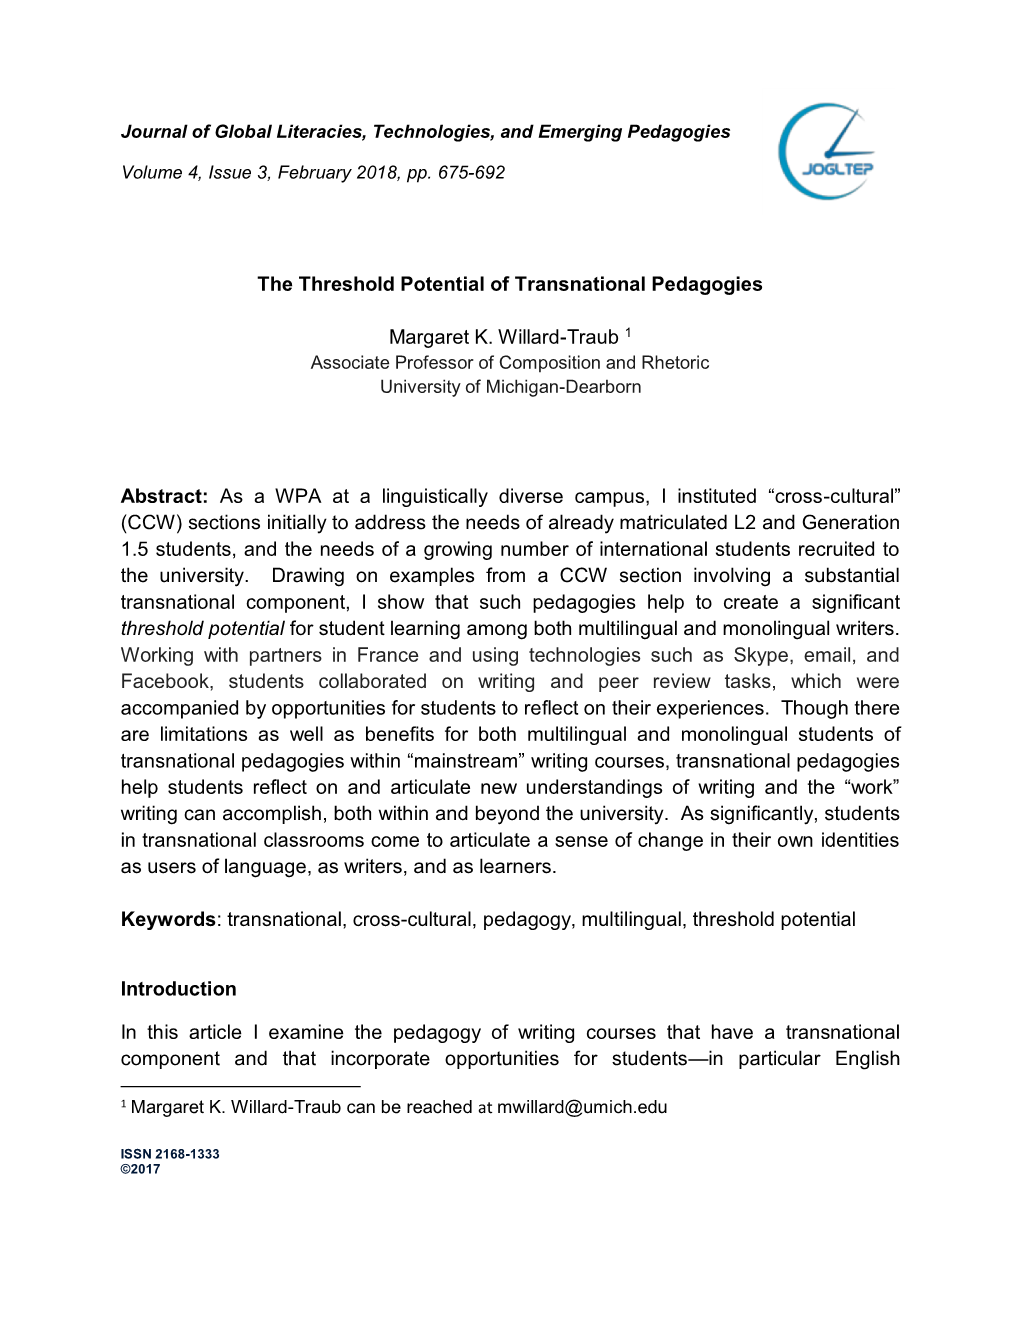 The Threshold Potential of Transnational Pedagogies